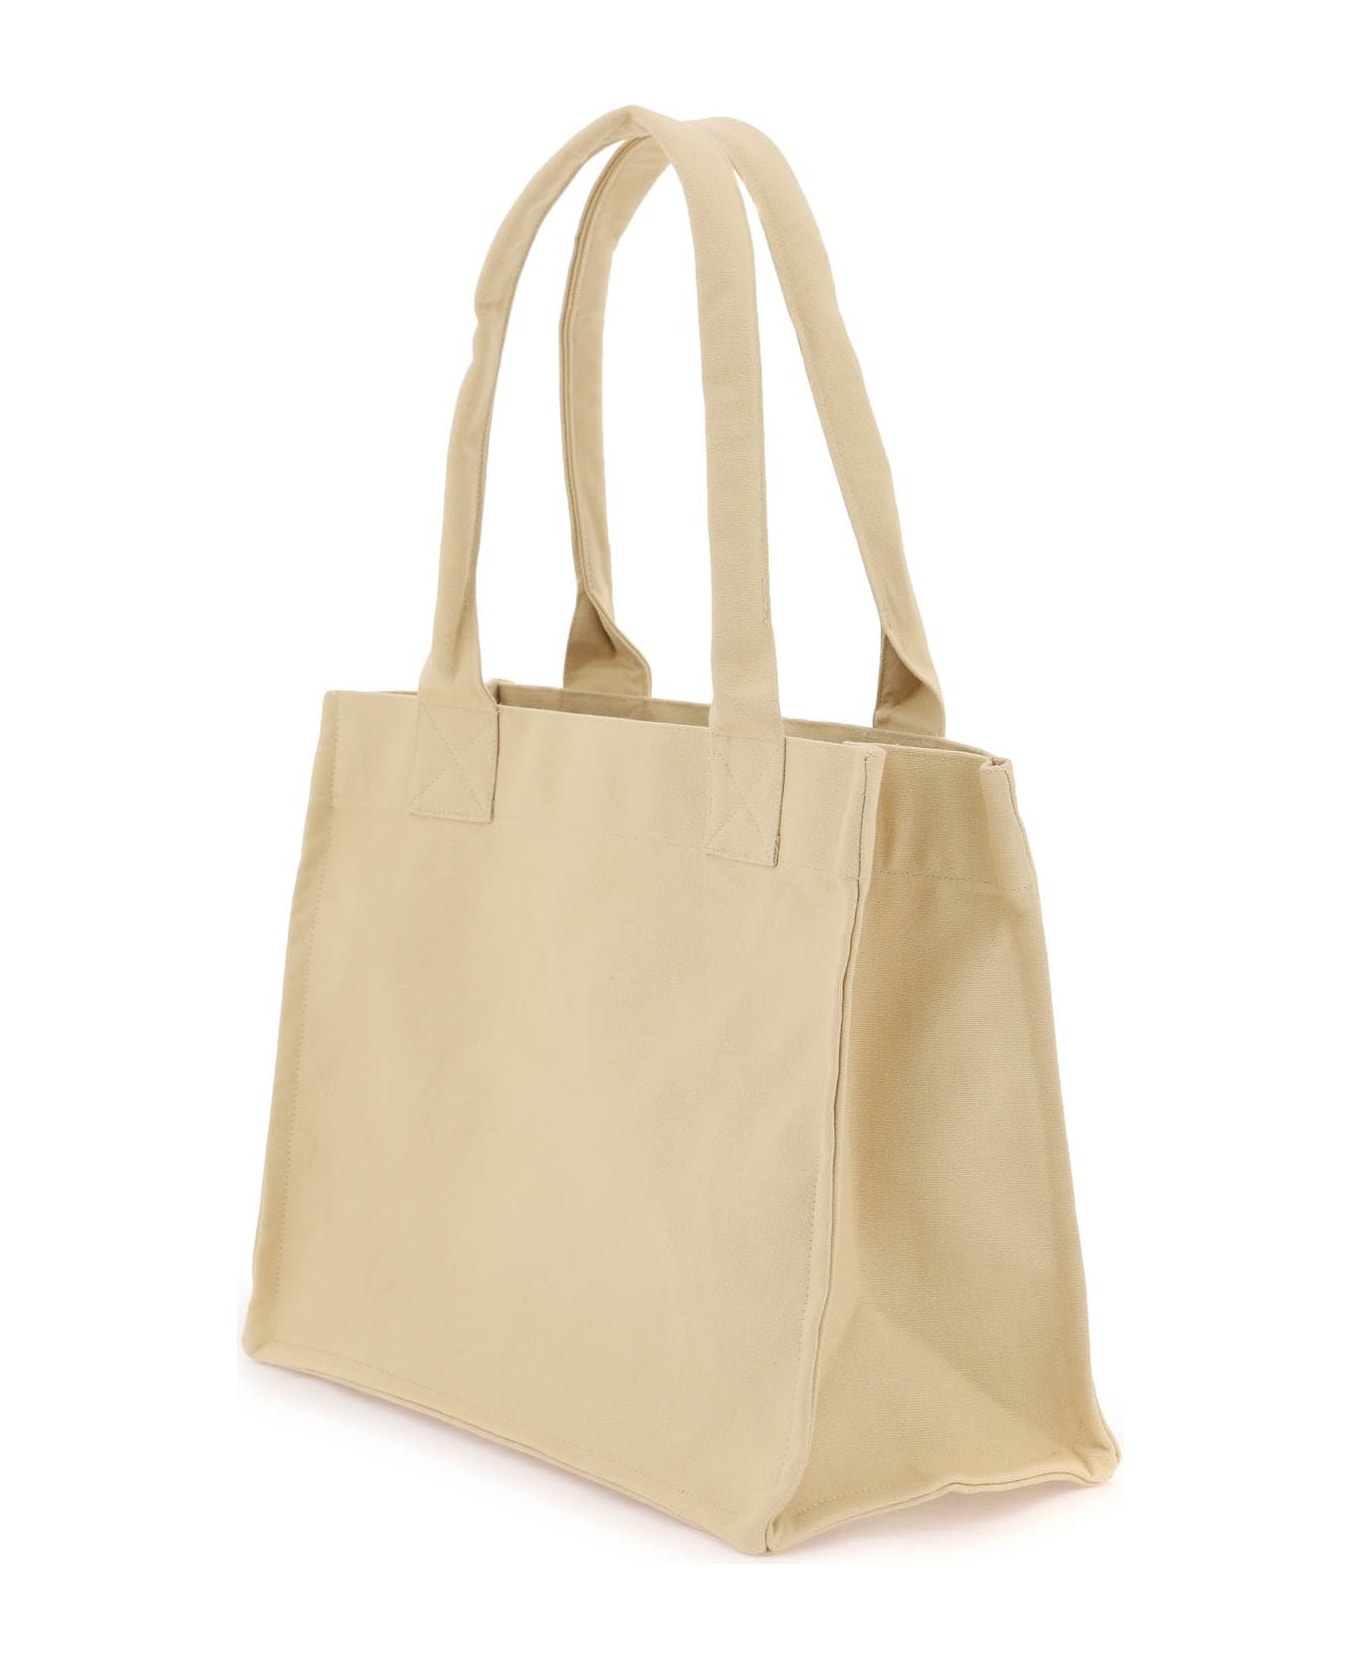 Ganni Tote Bag With Embroidery - BUTTERCREAM (Beige)